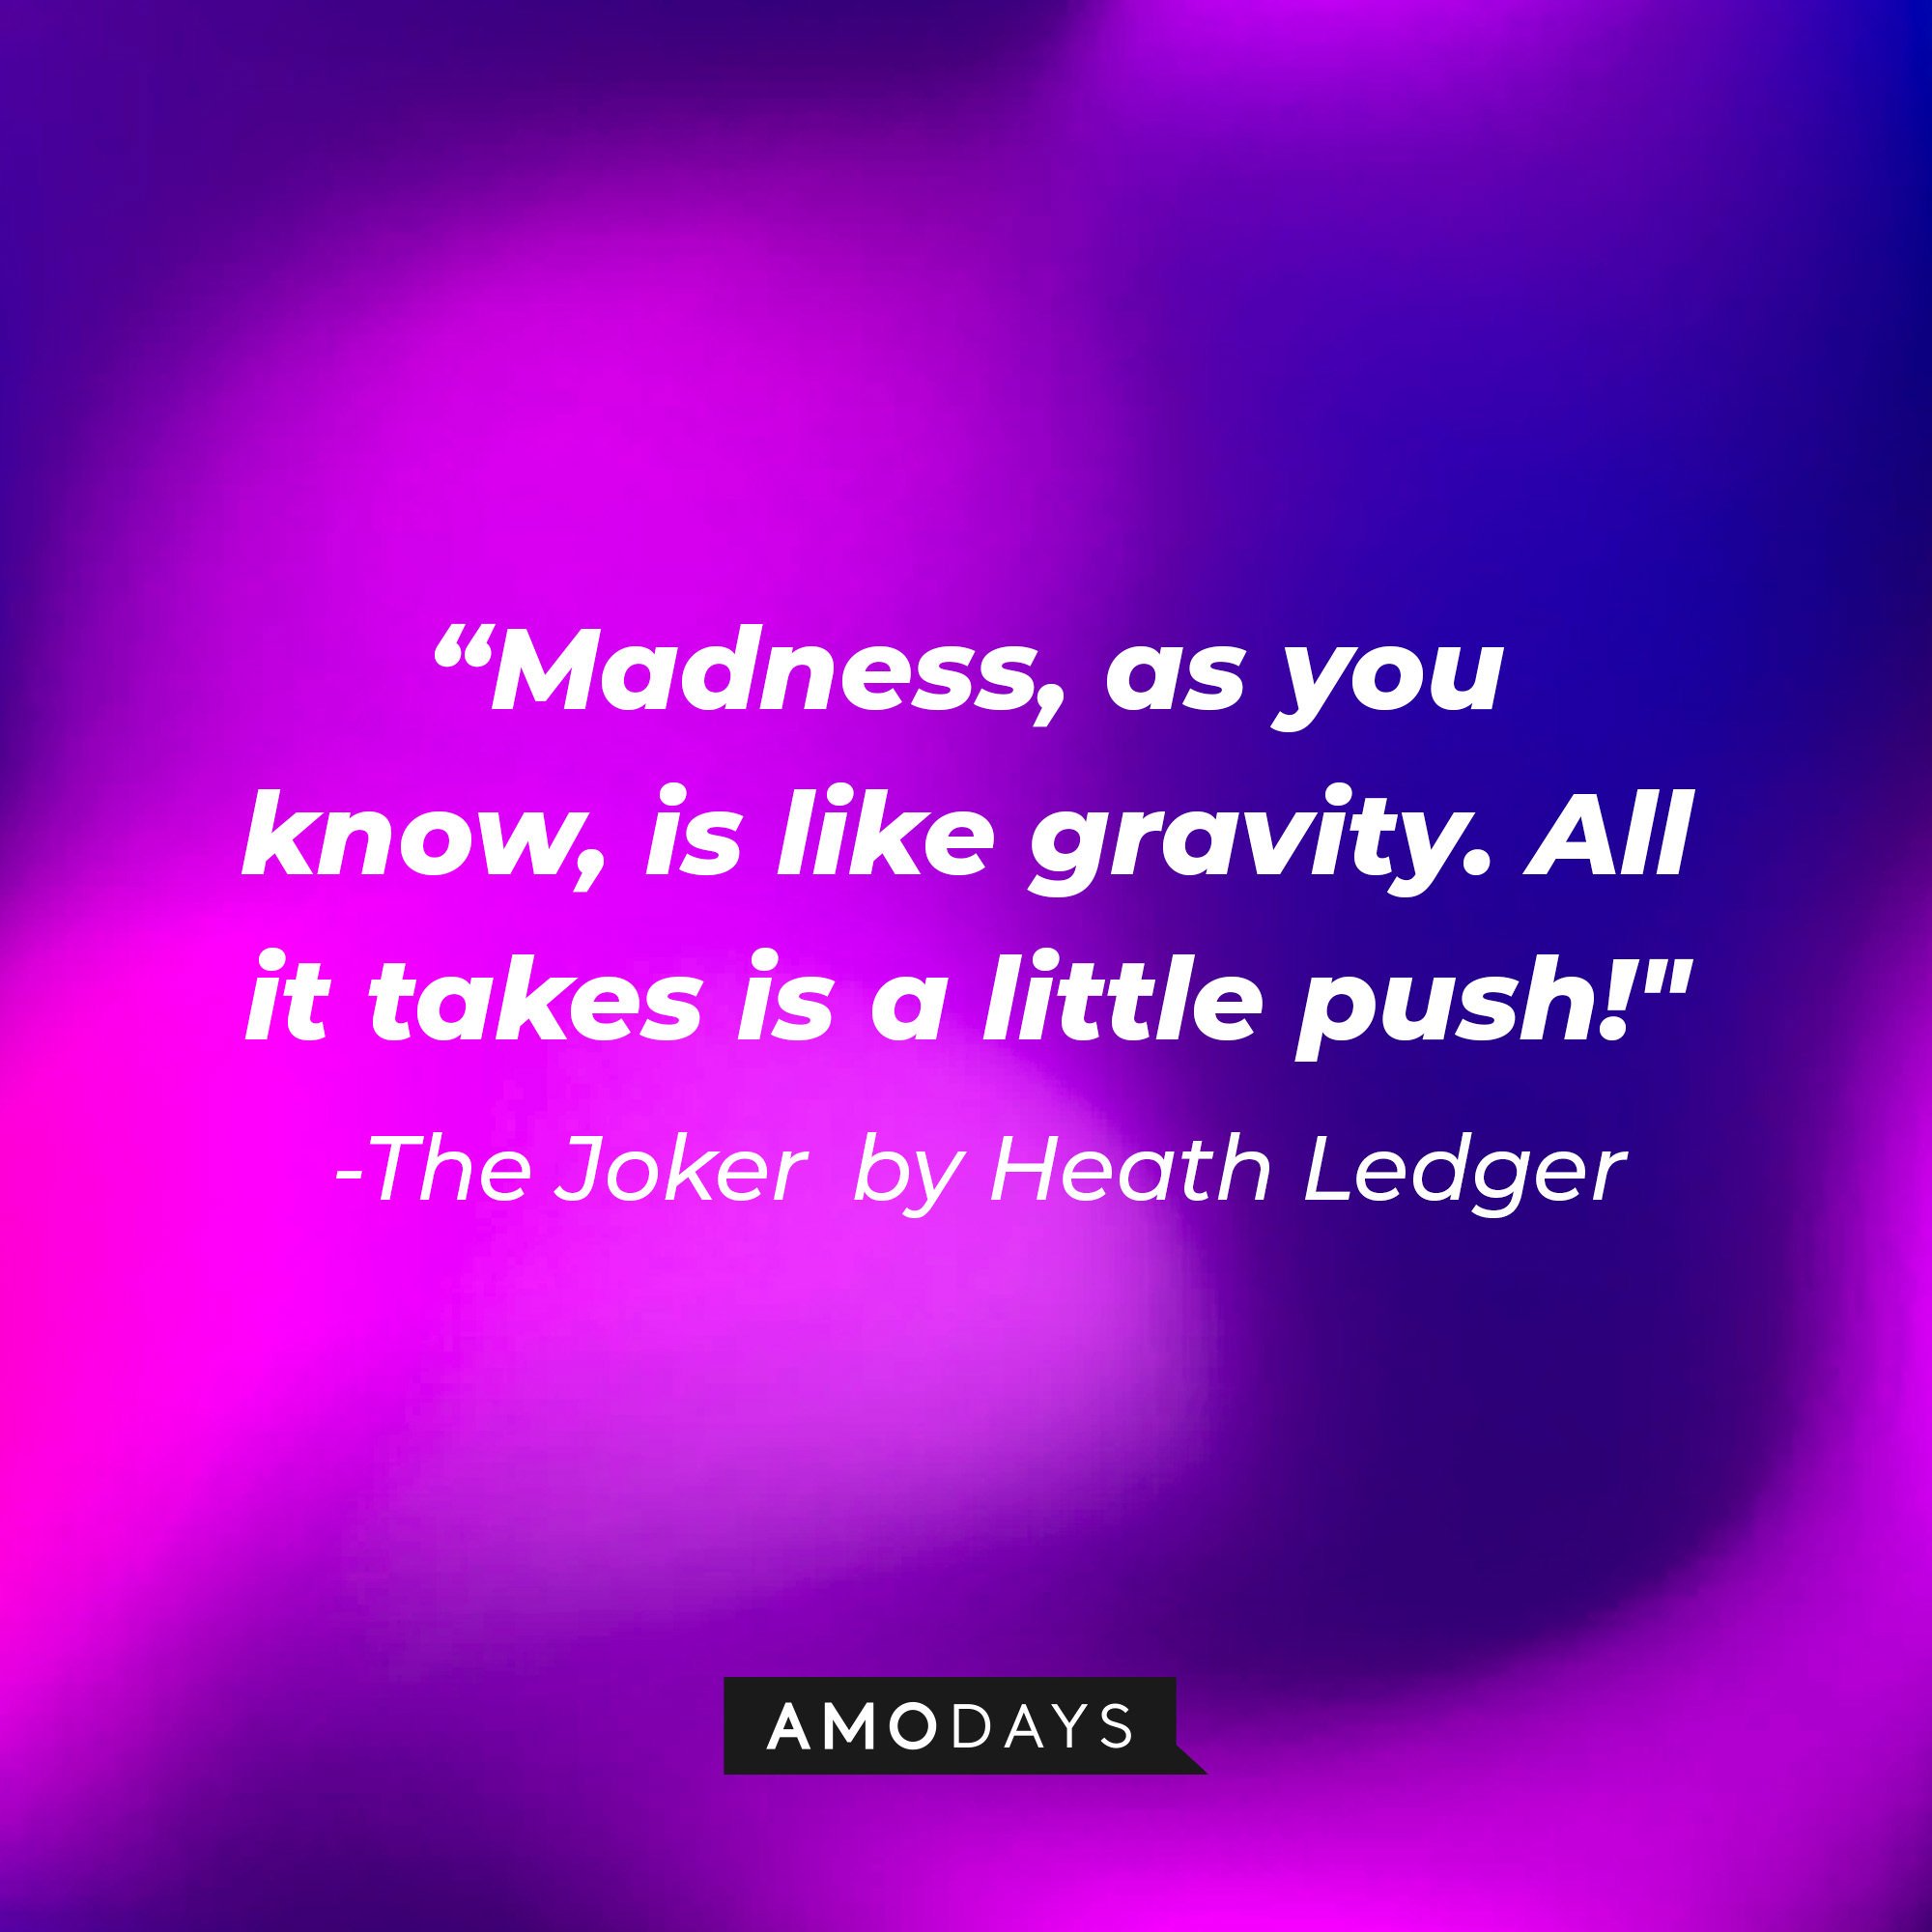 The Joker in Christopher Nolan’s “The Dark Night” quote: “Madness, as you know, is like gravity. All it takes is a little push!" | Image: Amodays